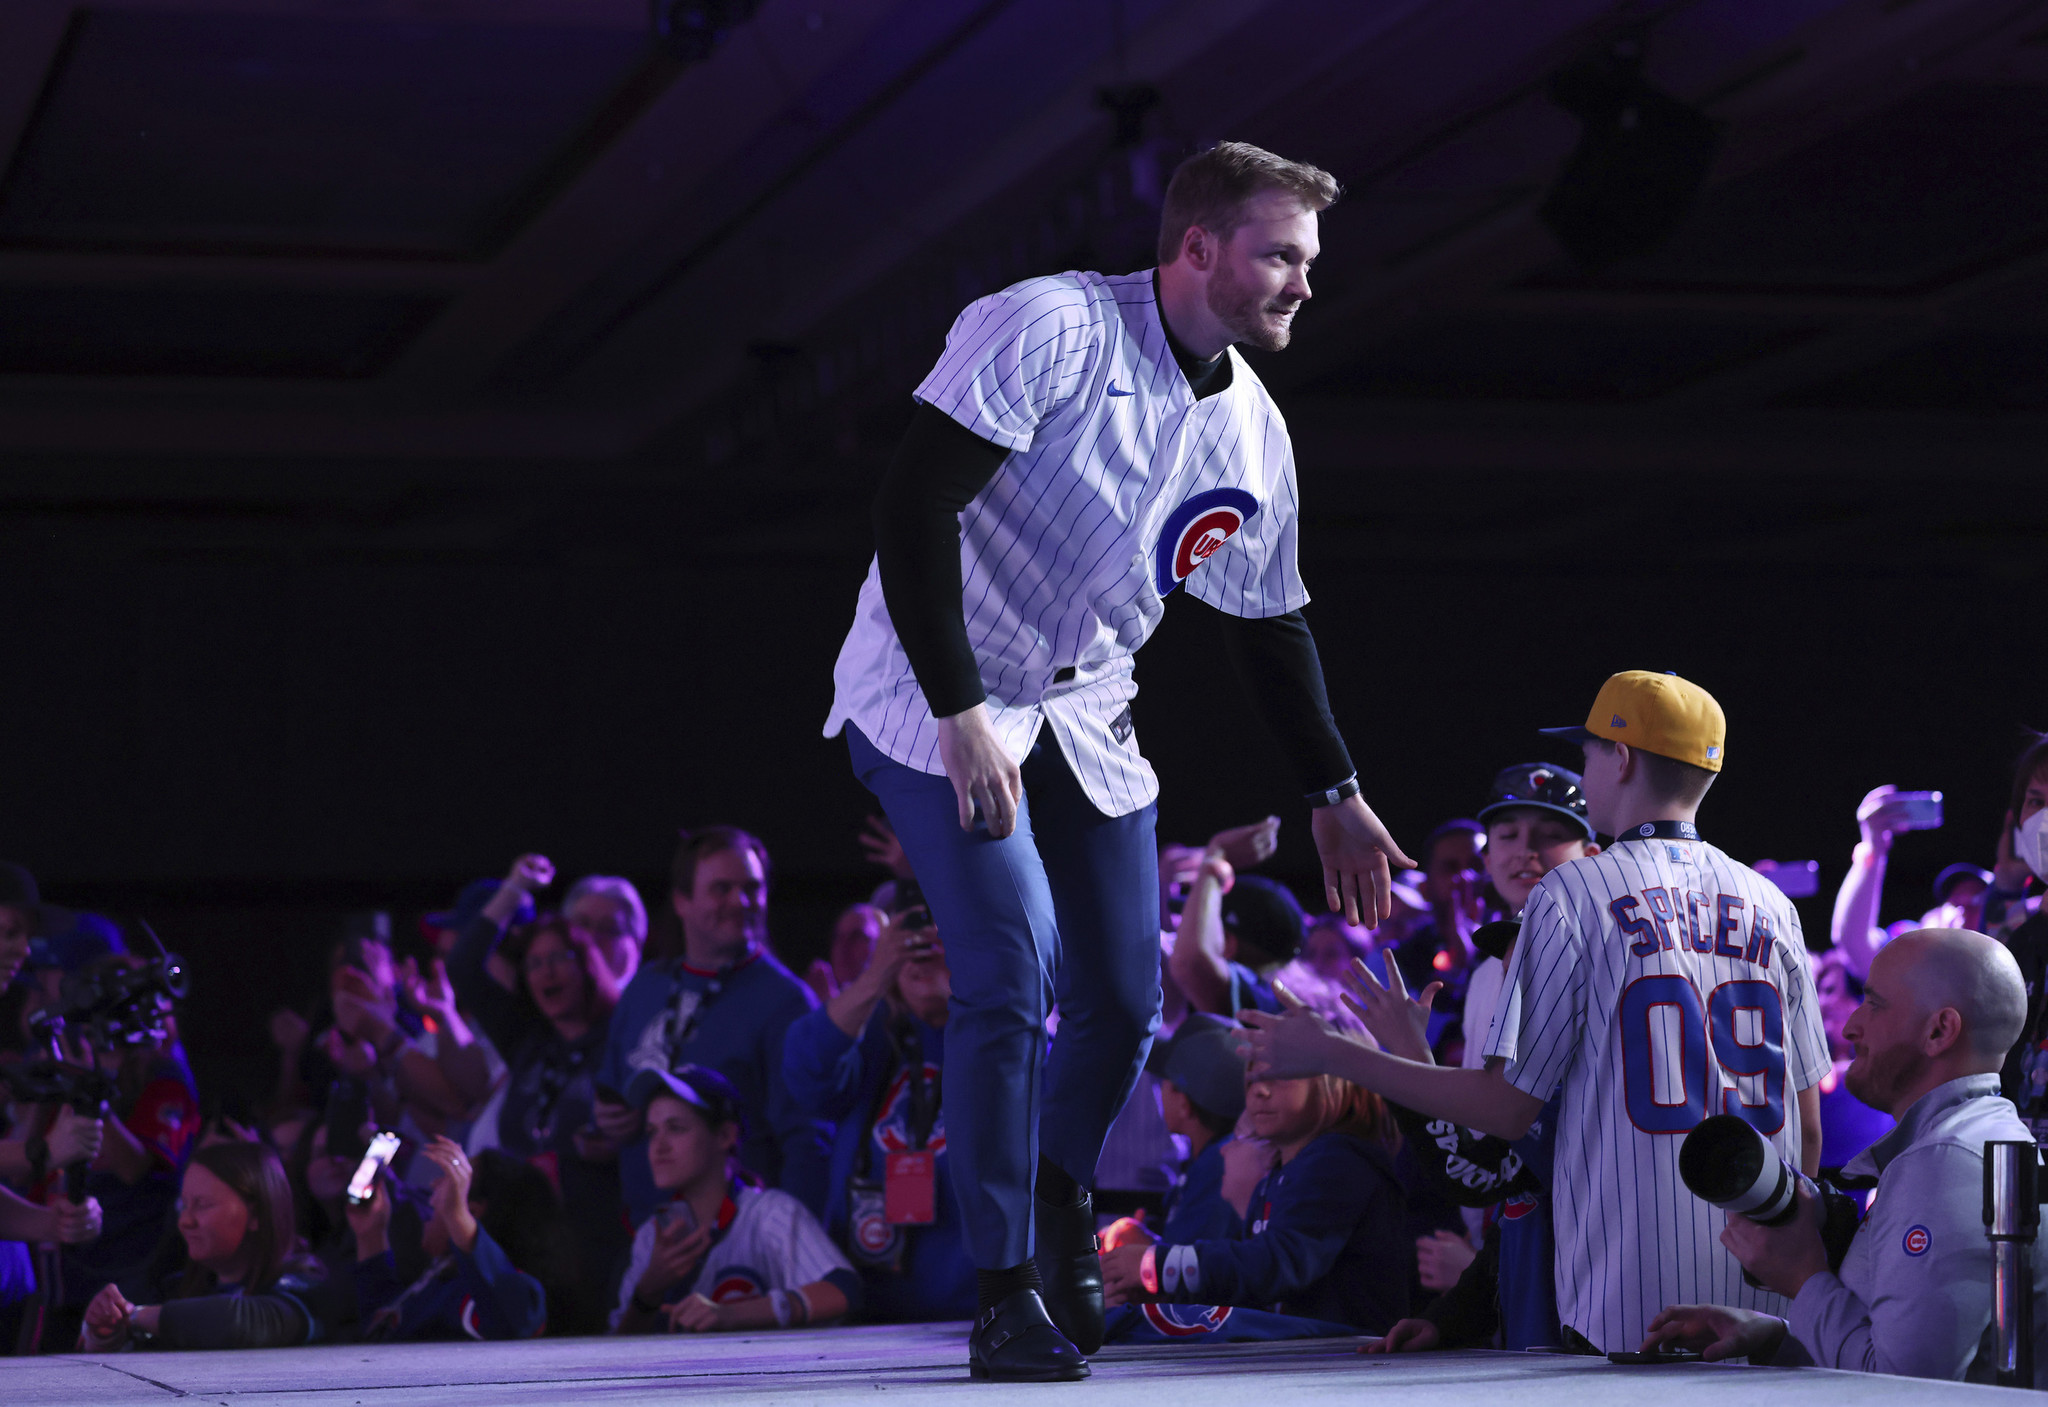 Chicago Cubs predictions for 2023: Will Ian Happ or Nico Hoerner get  extensions? - The Athletic